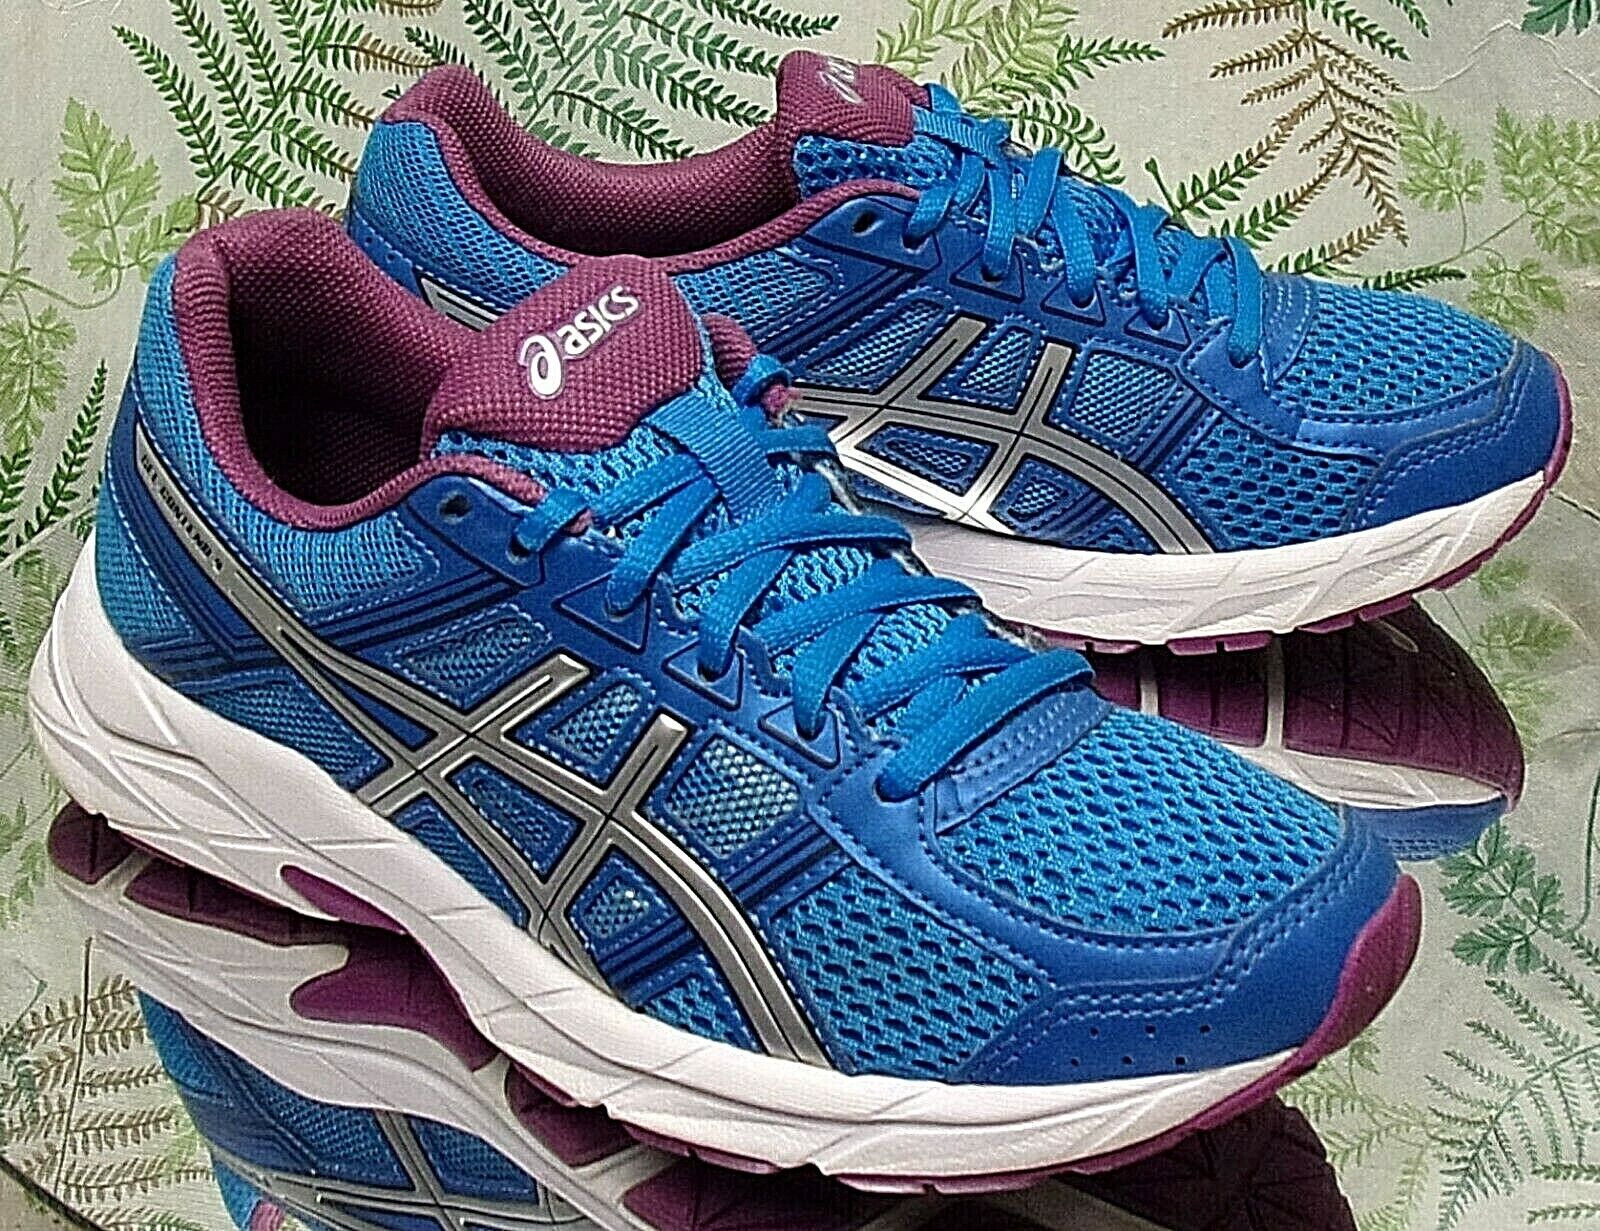 ASICS CONTEND 4 BLUE SILVER SNEAKERS WALKING RUNNING COMFORT SHOES WOMENS SZ 6